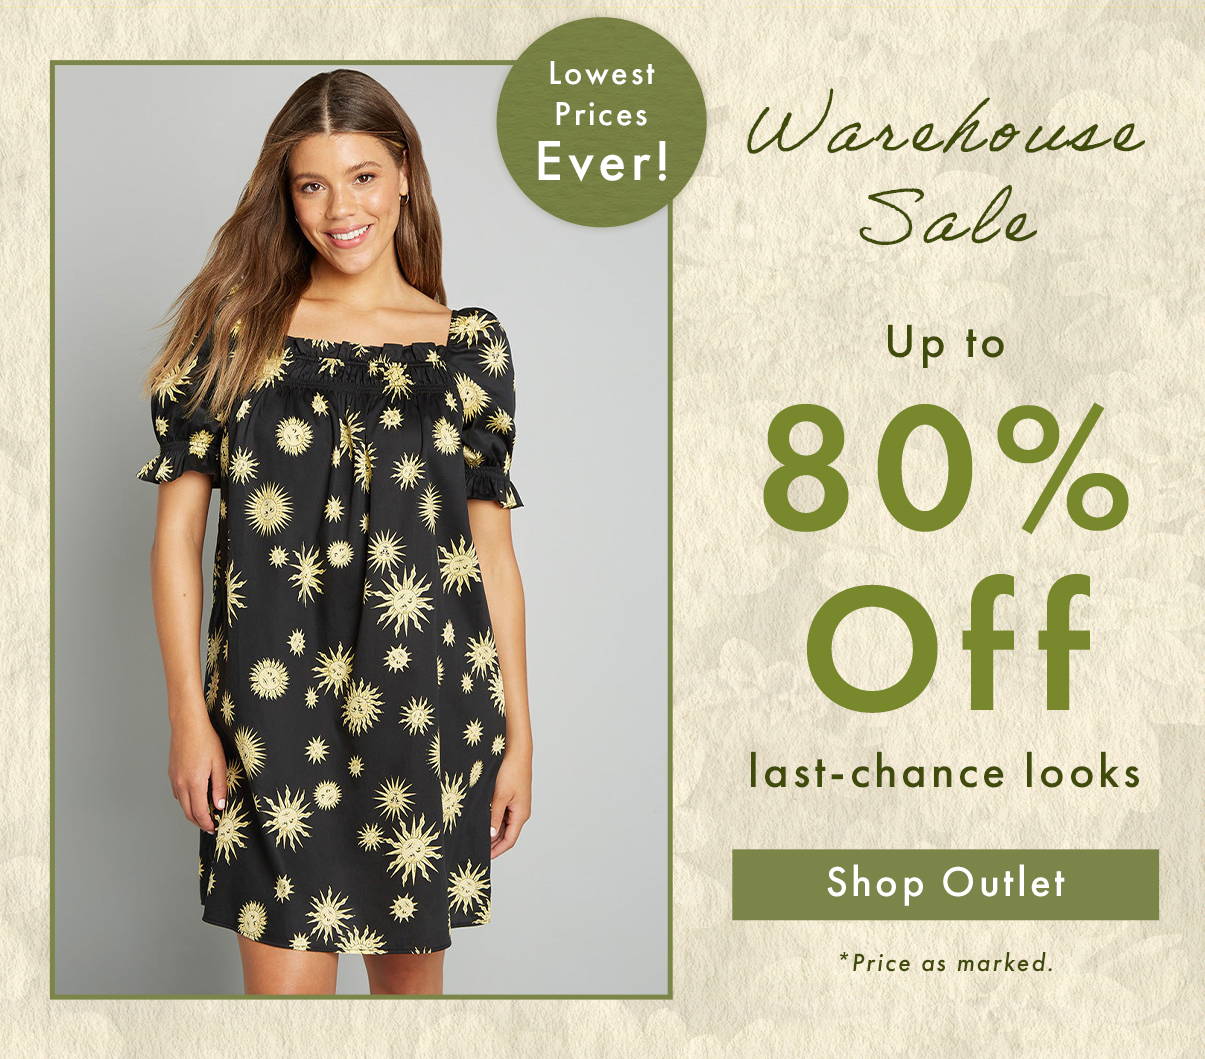 [Lowest Prices Ever!] Warehouse Sale Up to 80% Off last-chance looks. Shop Outlet.